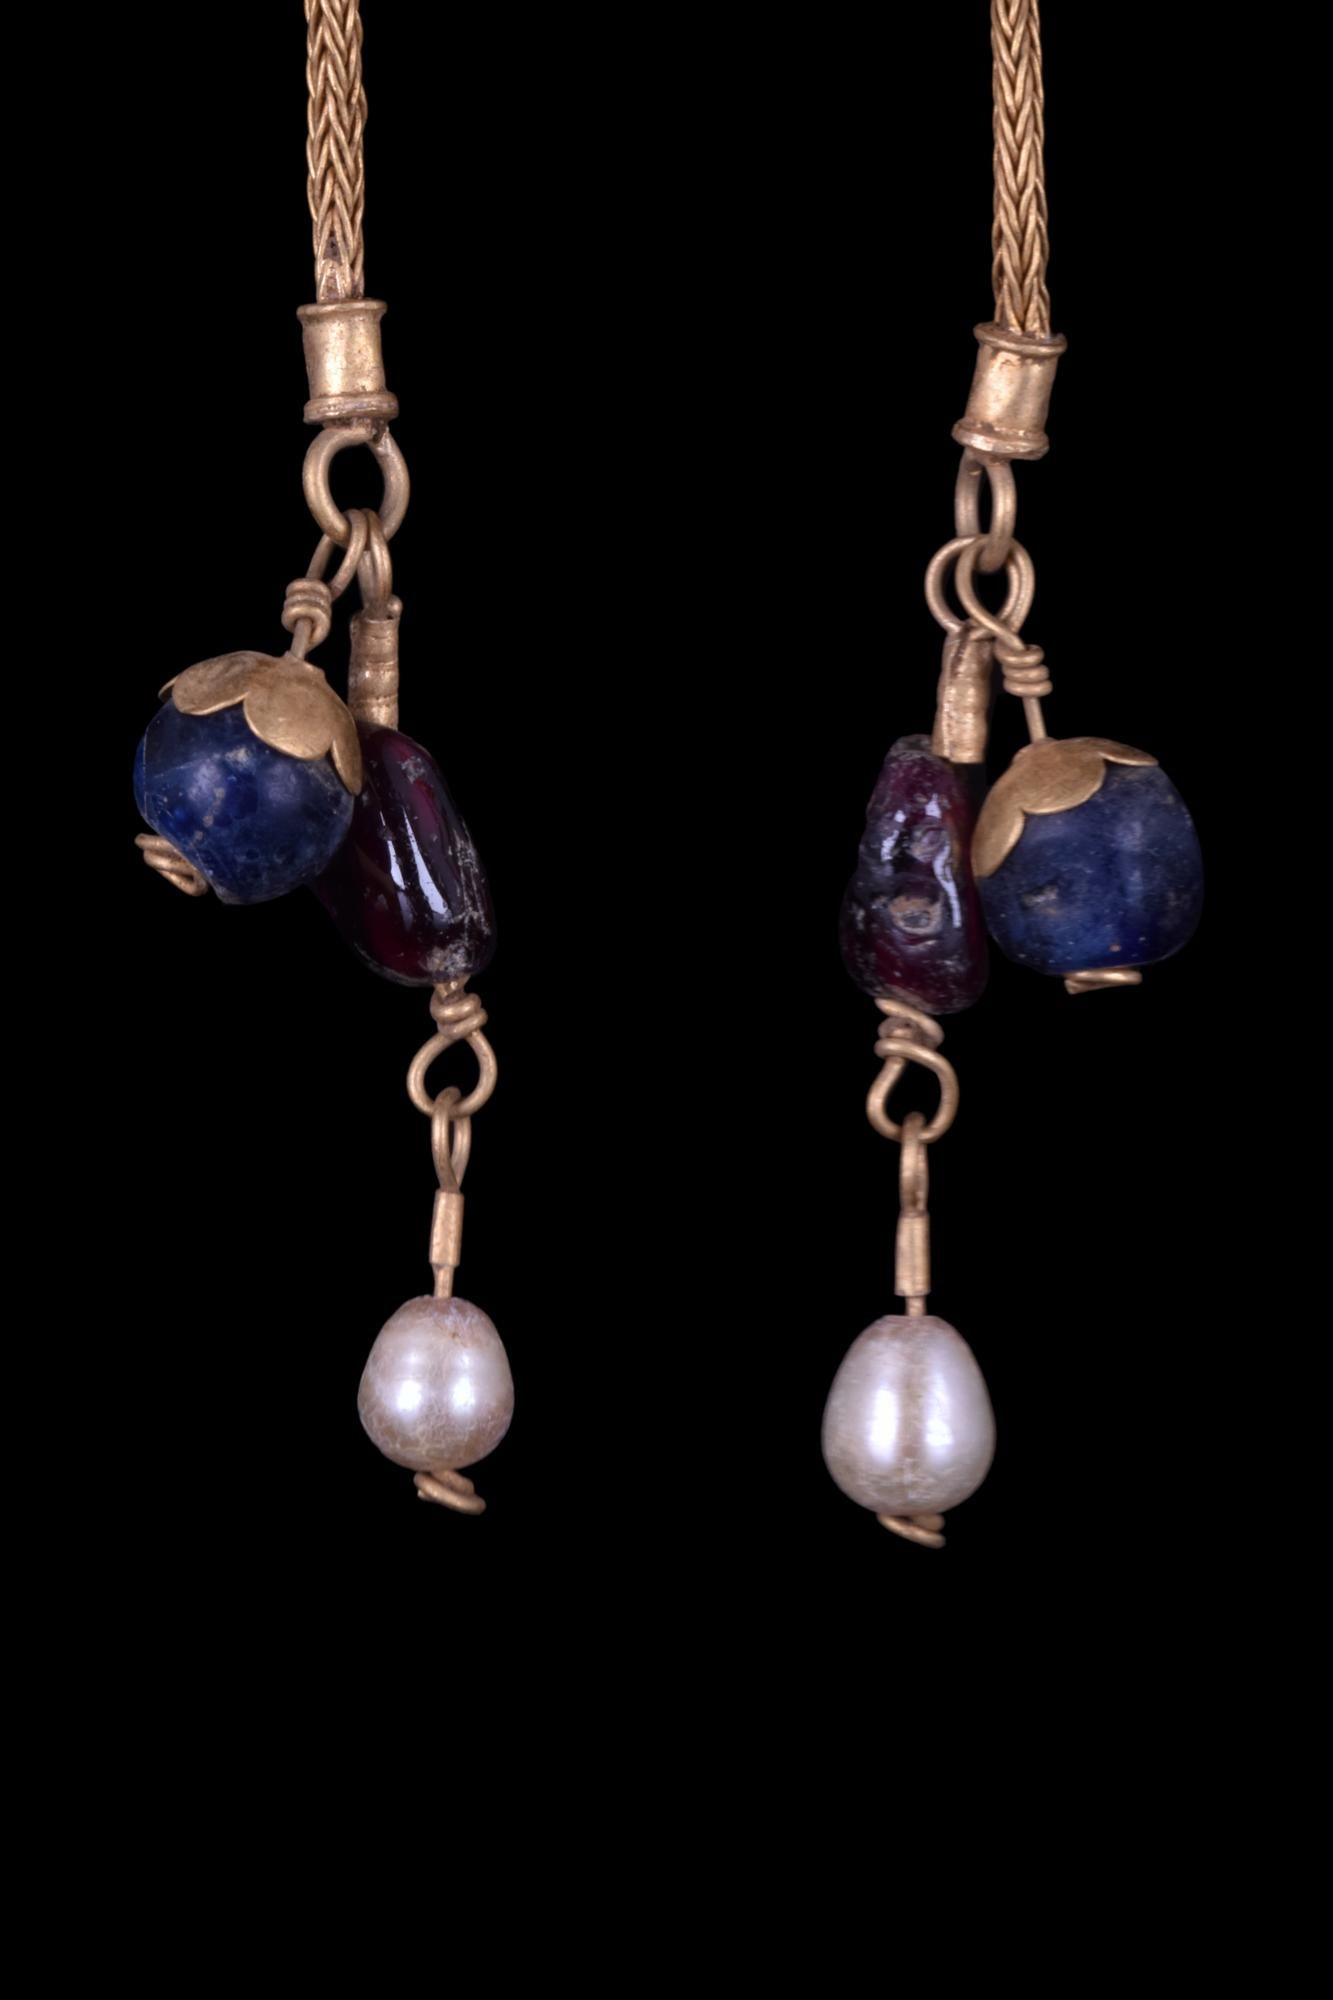 A matched pair of Byzantine gold earrings, each with a tapering hoop, hook-and-clasp closure, and a single elongated pendant. The pendant is composed of glass and pearl spherical beads, attached to a cord of woven gold wire. These beautiful pieces